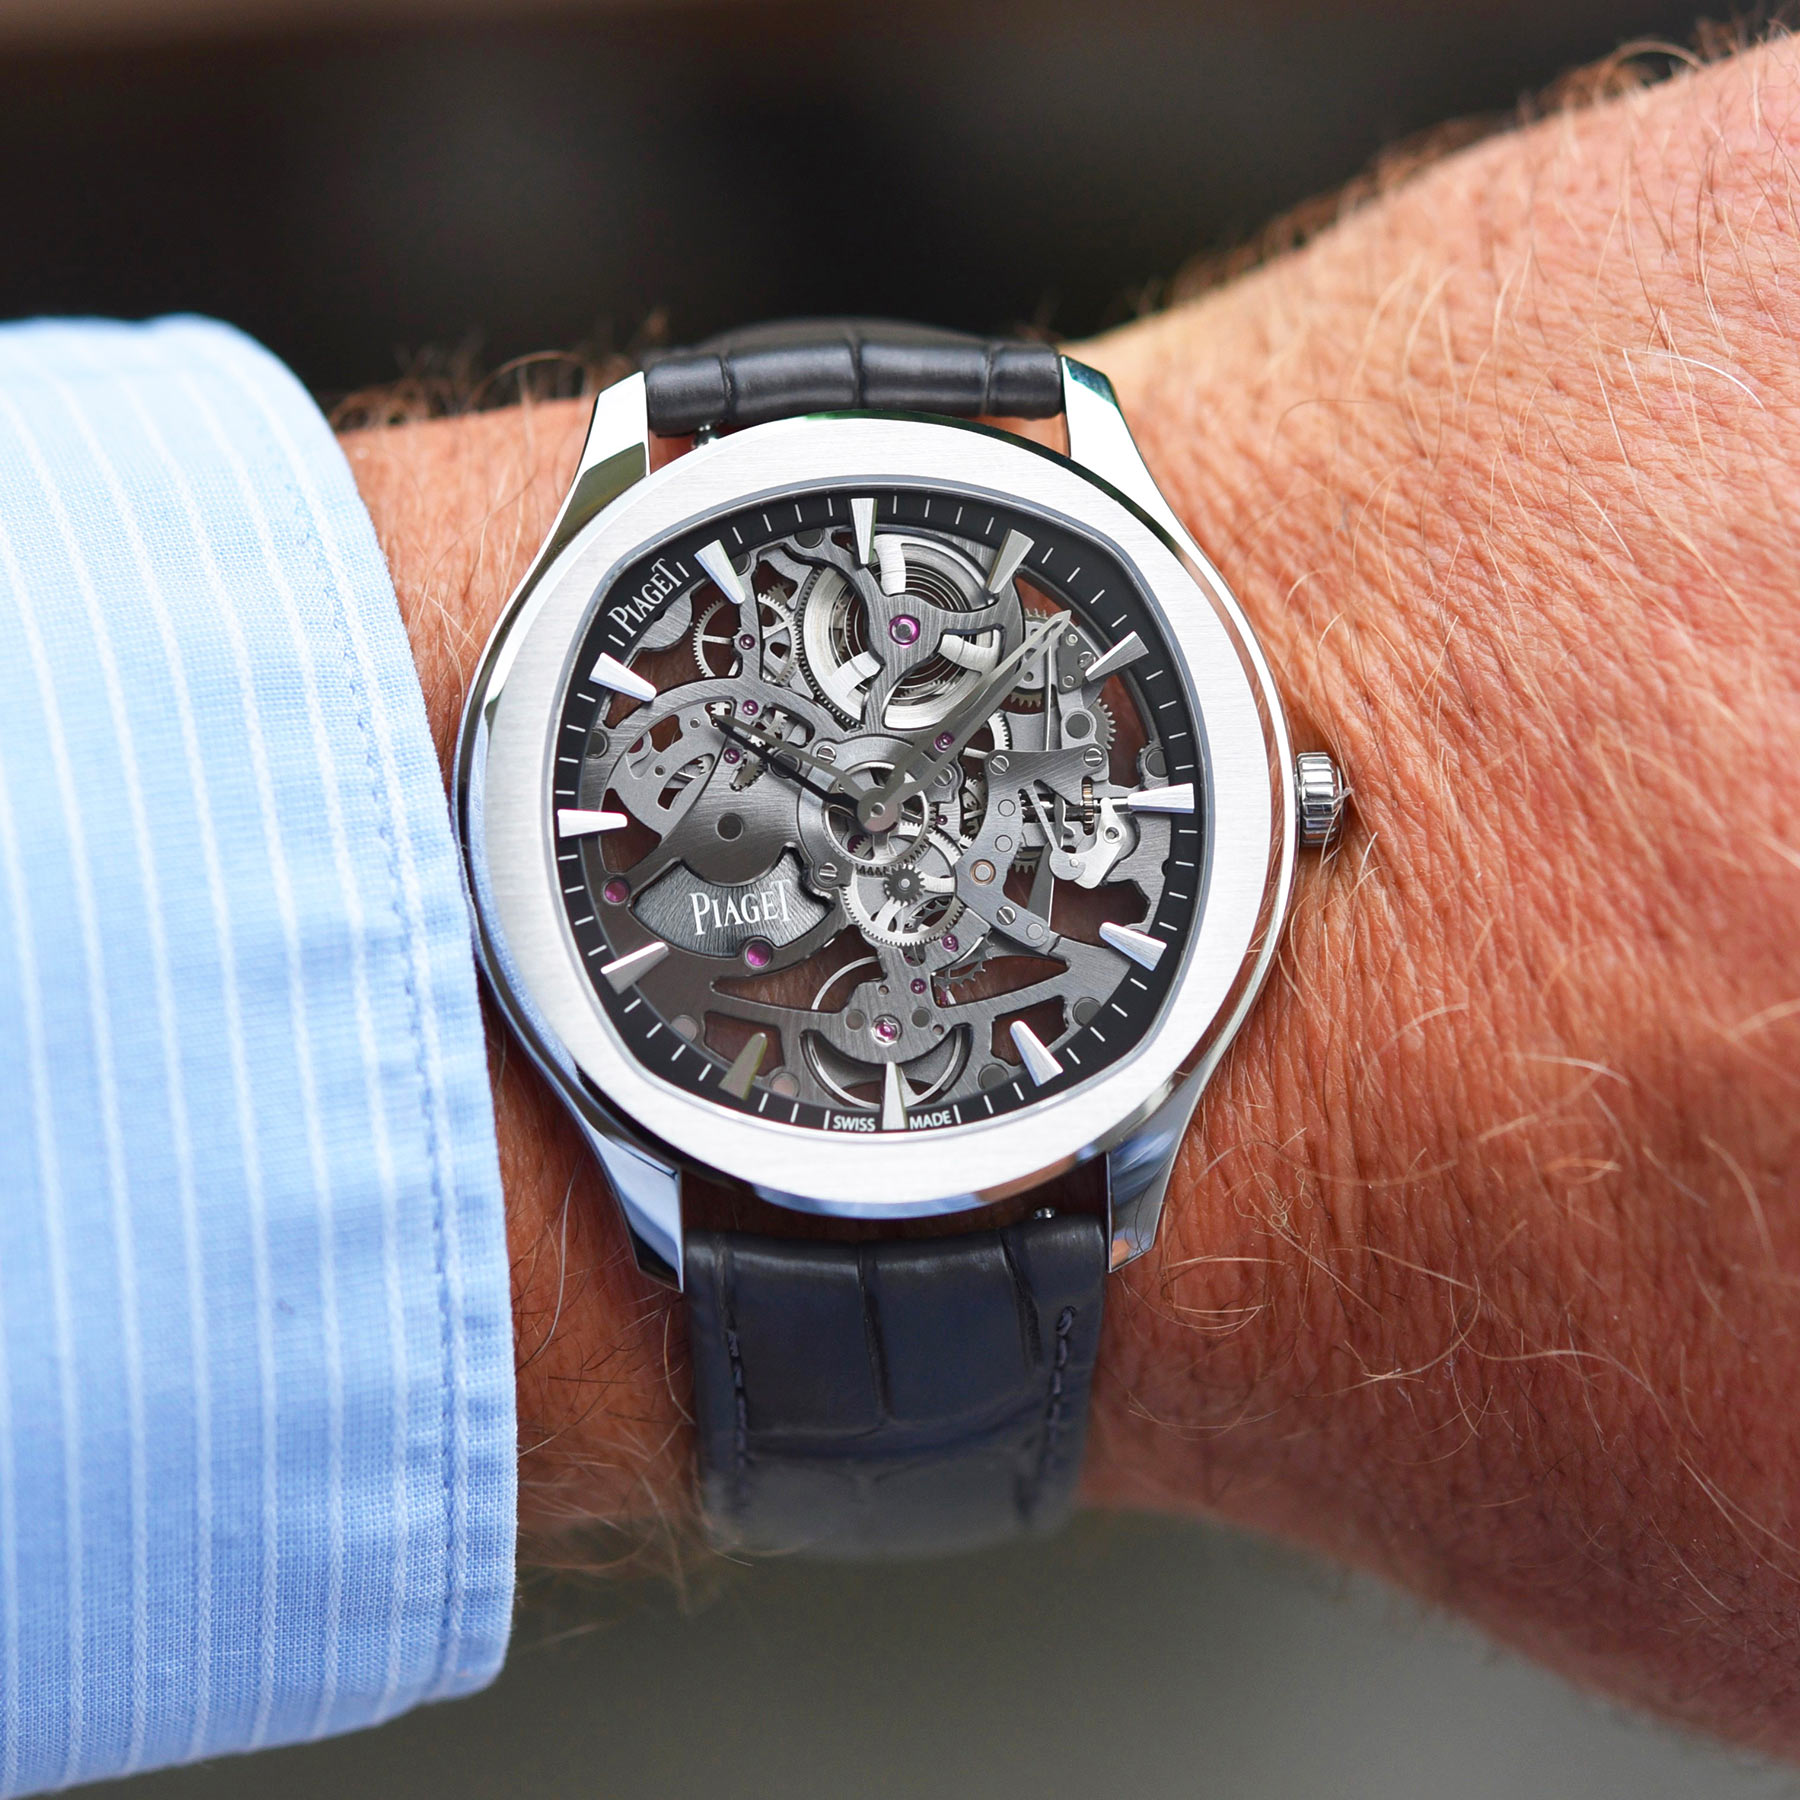 Piaget Polo Skeleton in-depth review video - 2